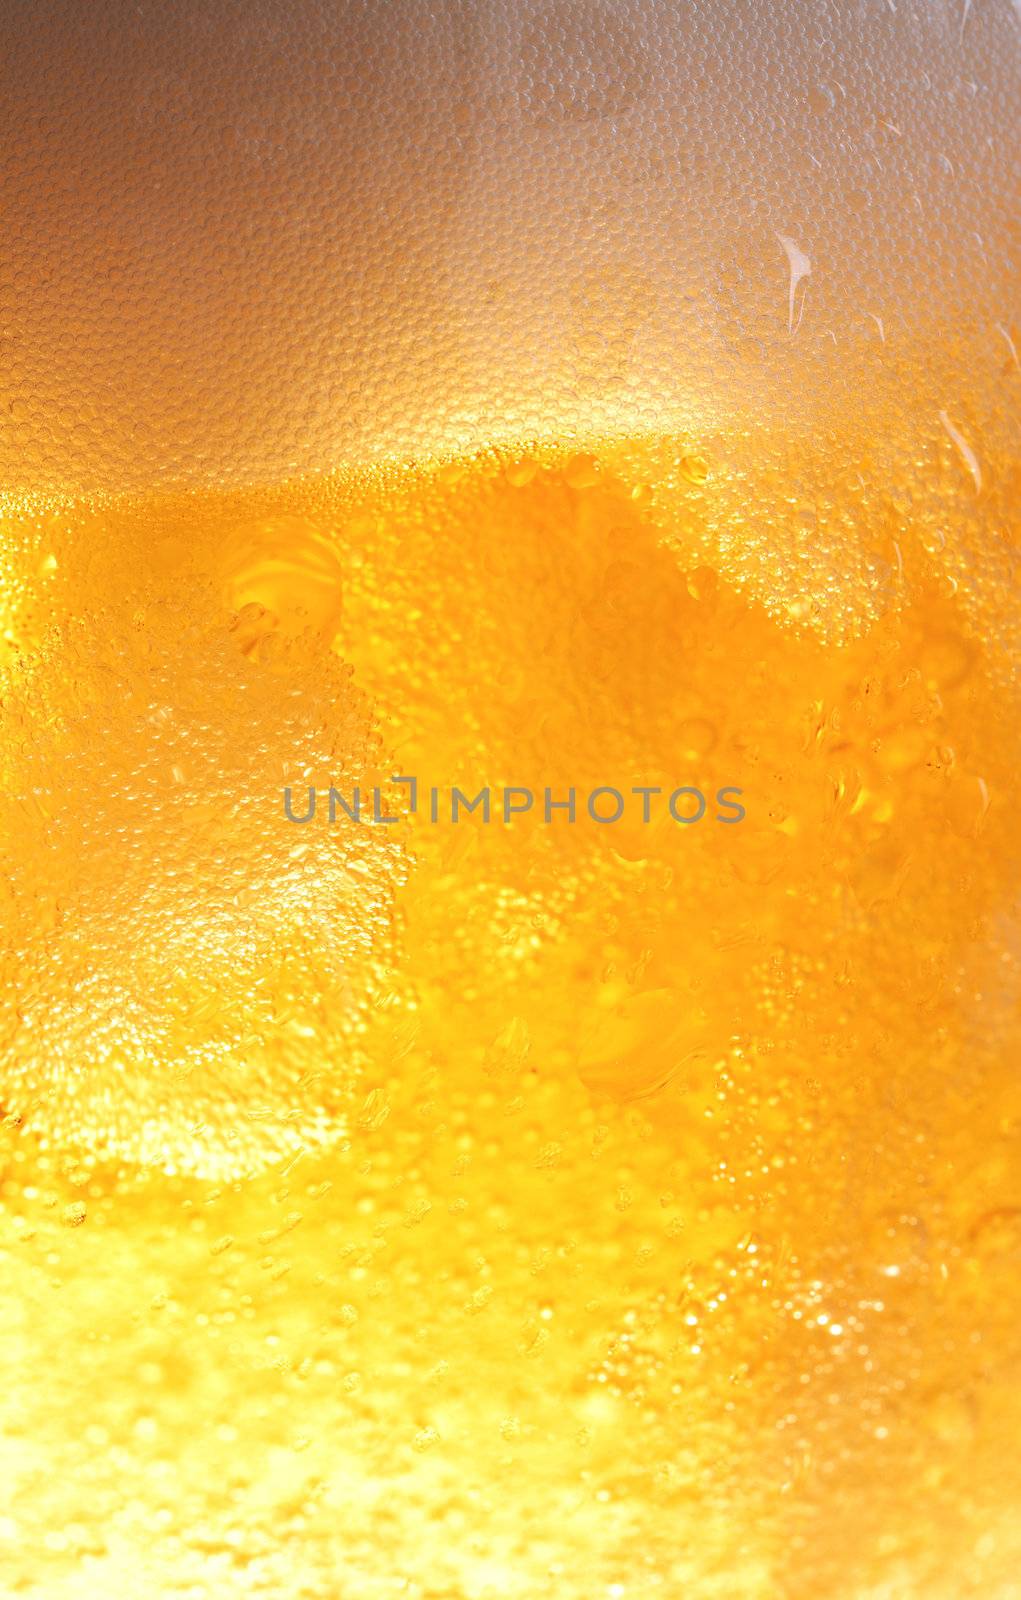 Bubbles in beer and droplets outside the glass.